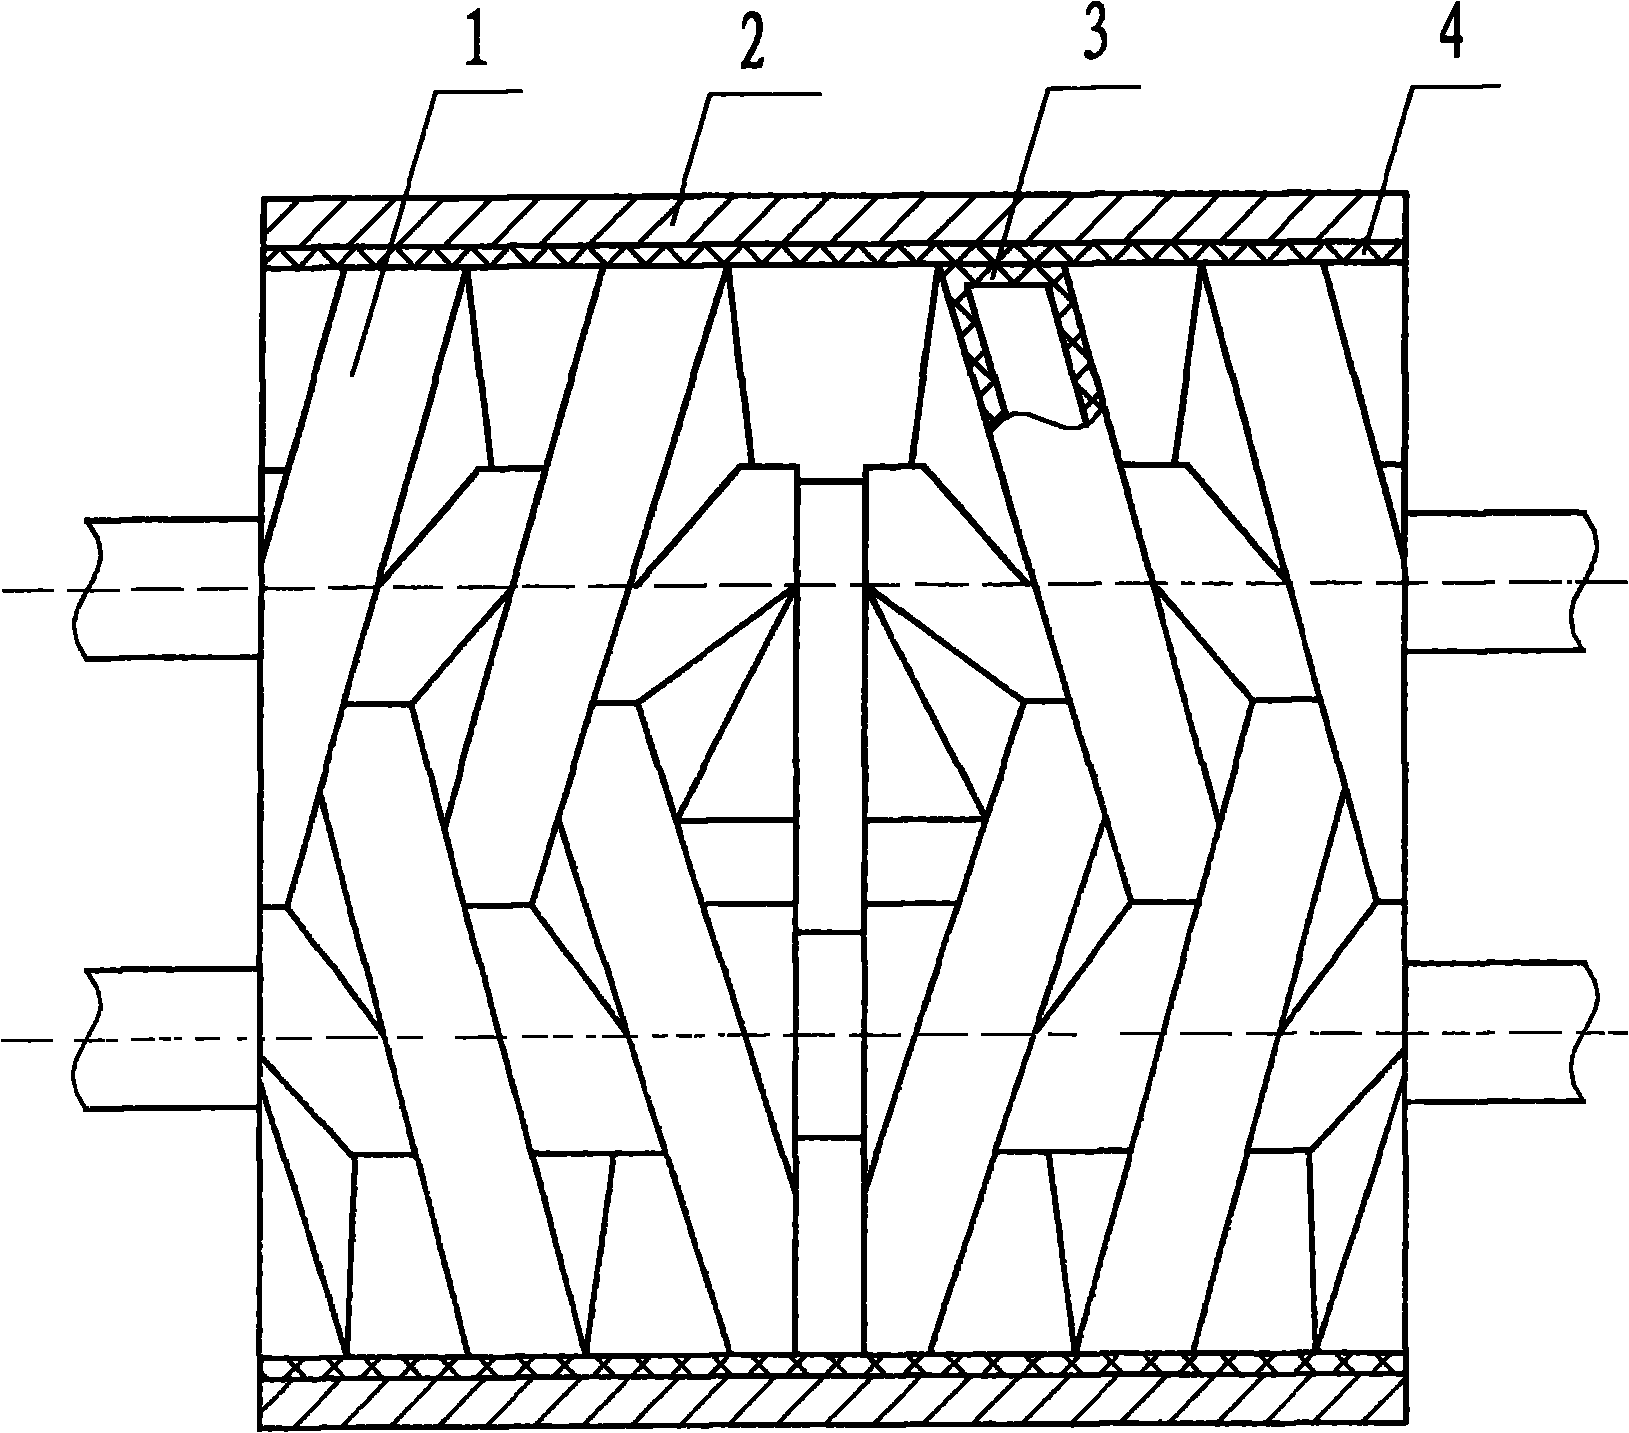 Double-screw pump provided with elastic lining layer